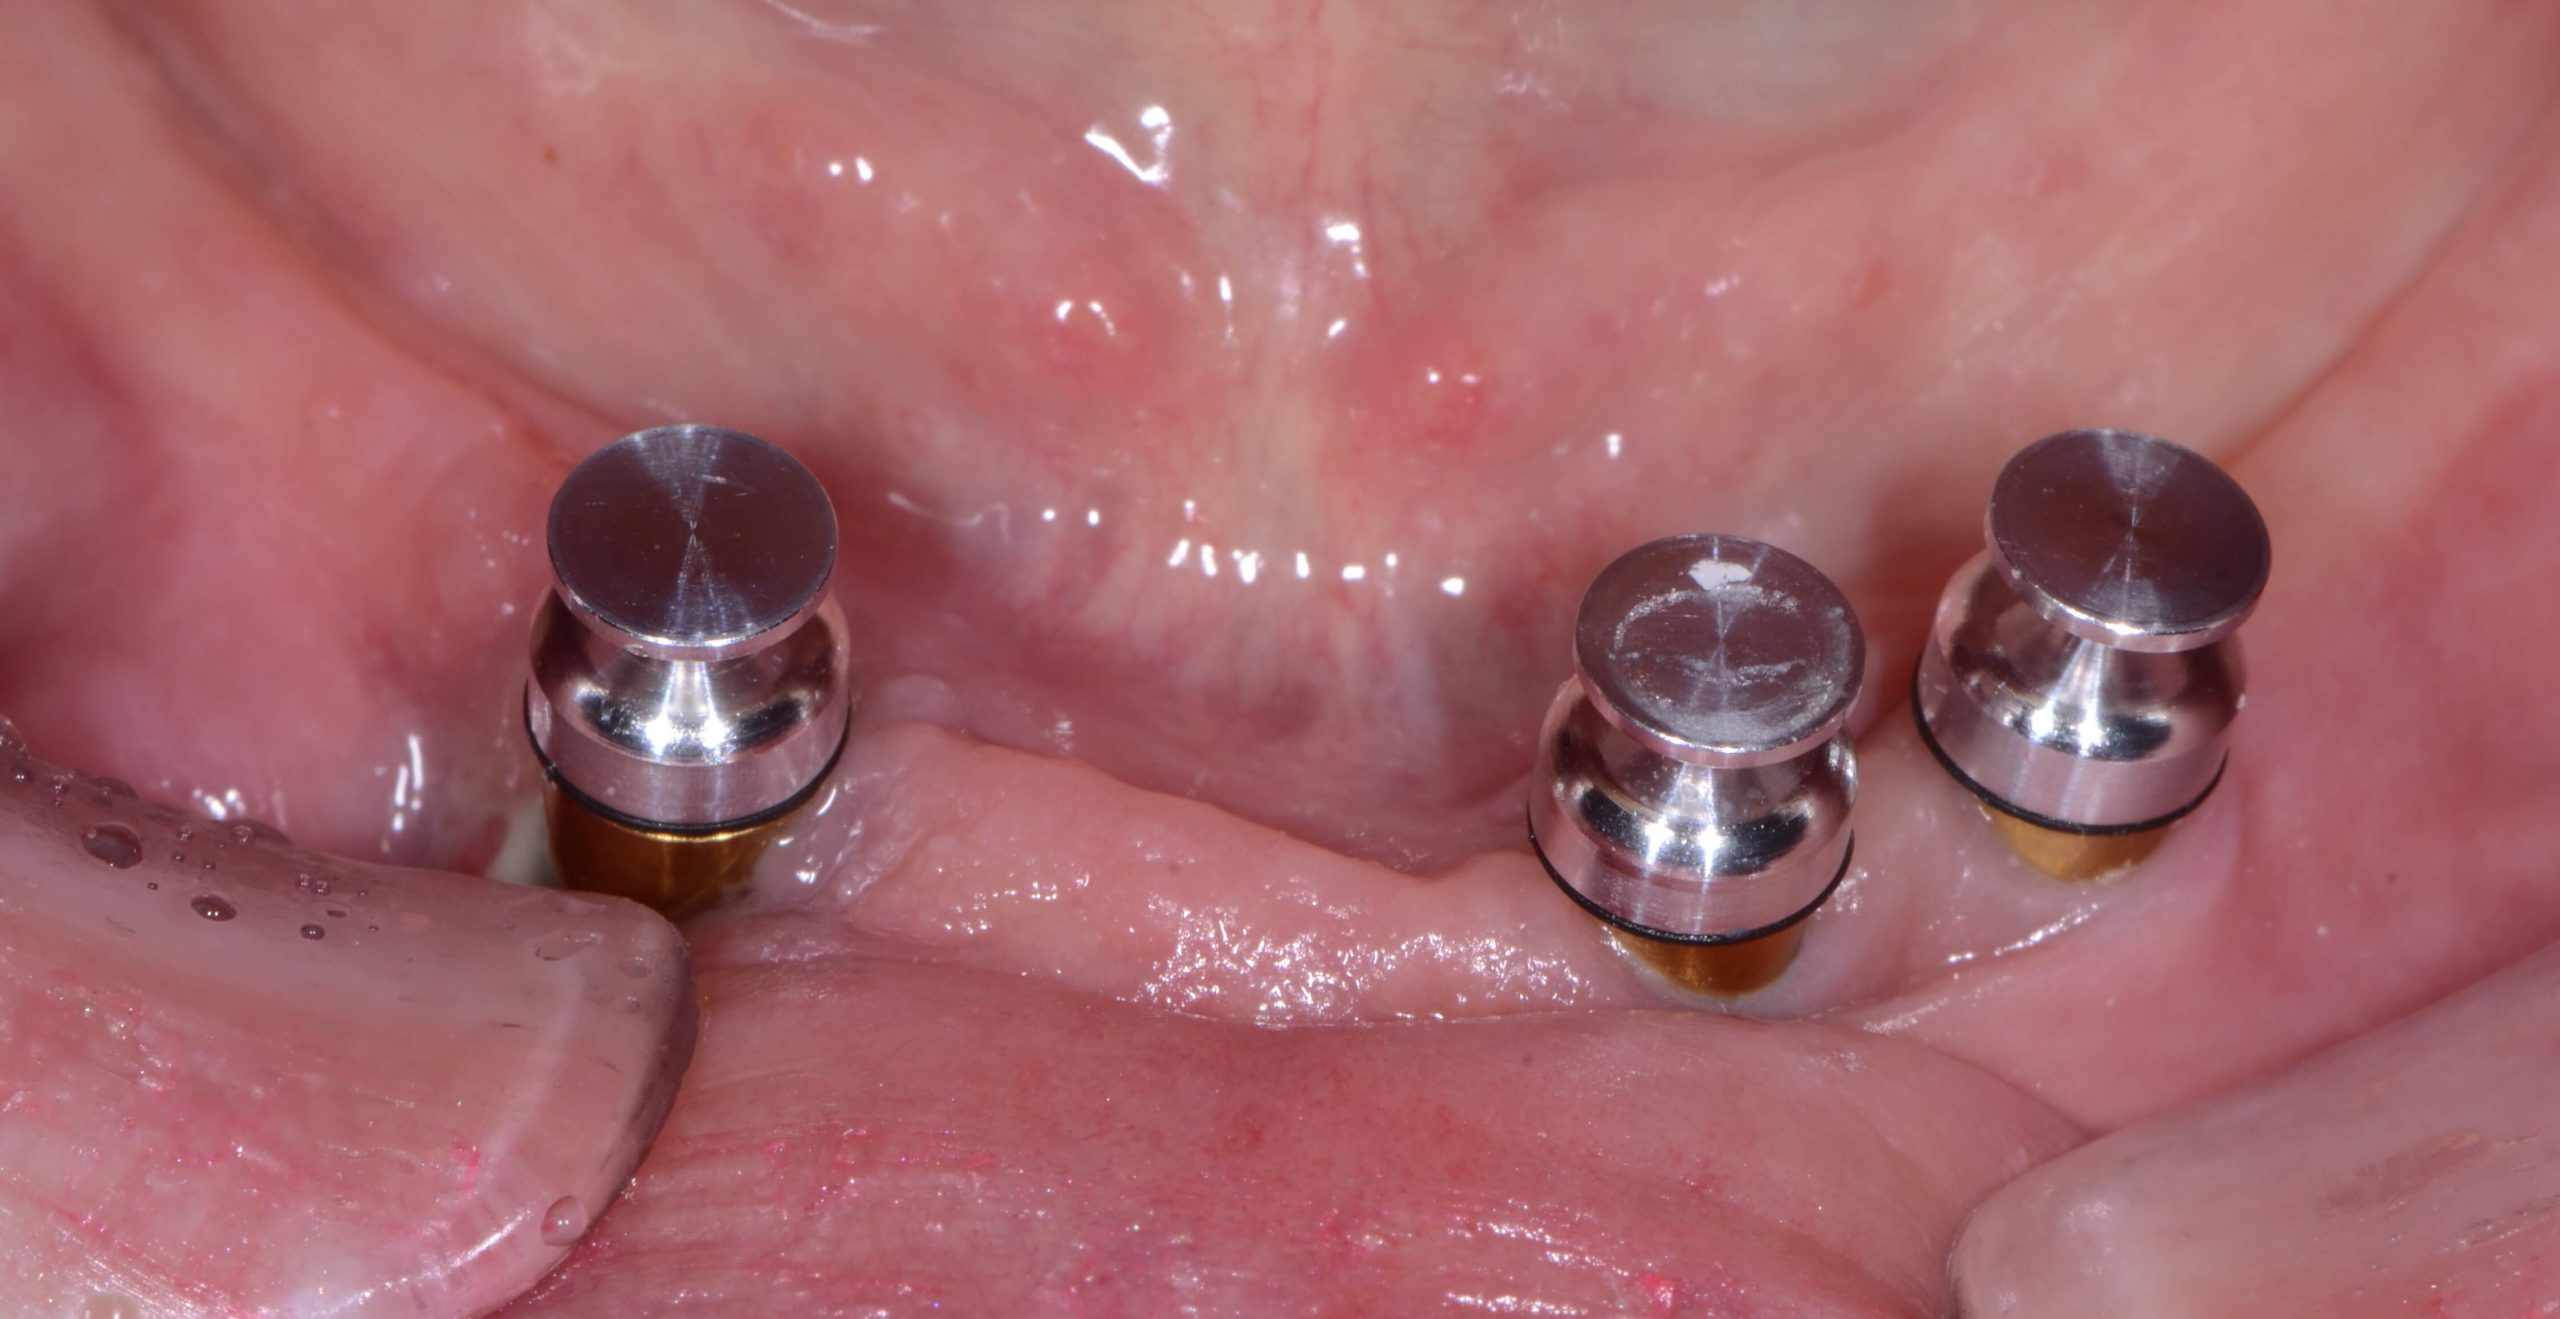 Treatment Planning For Future Implant Cases